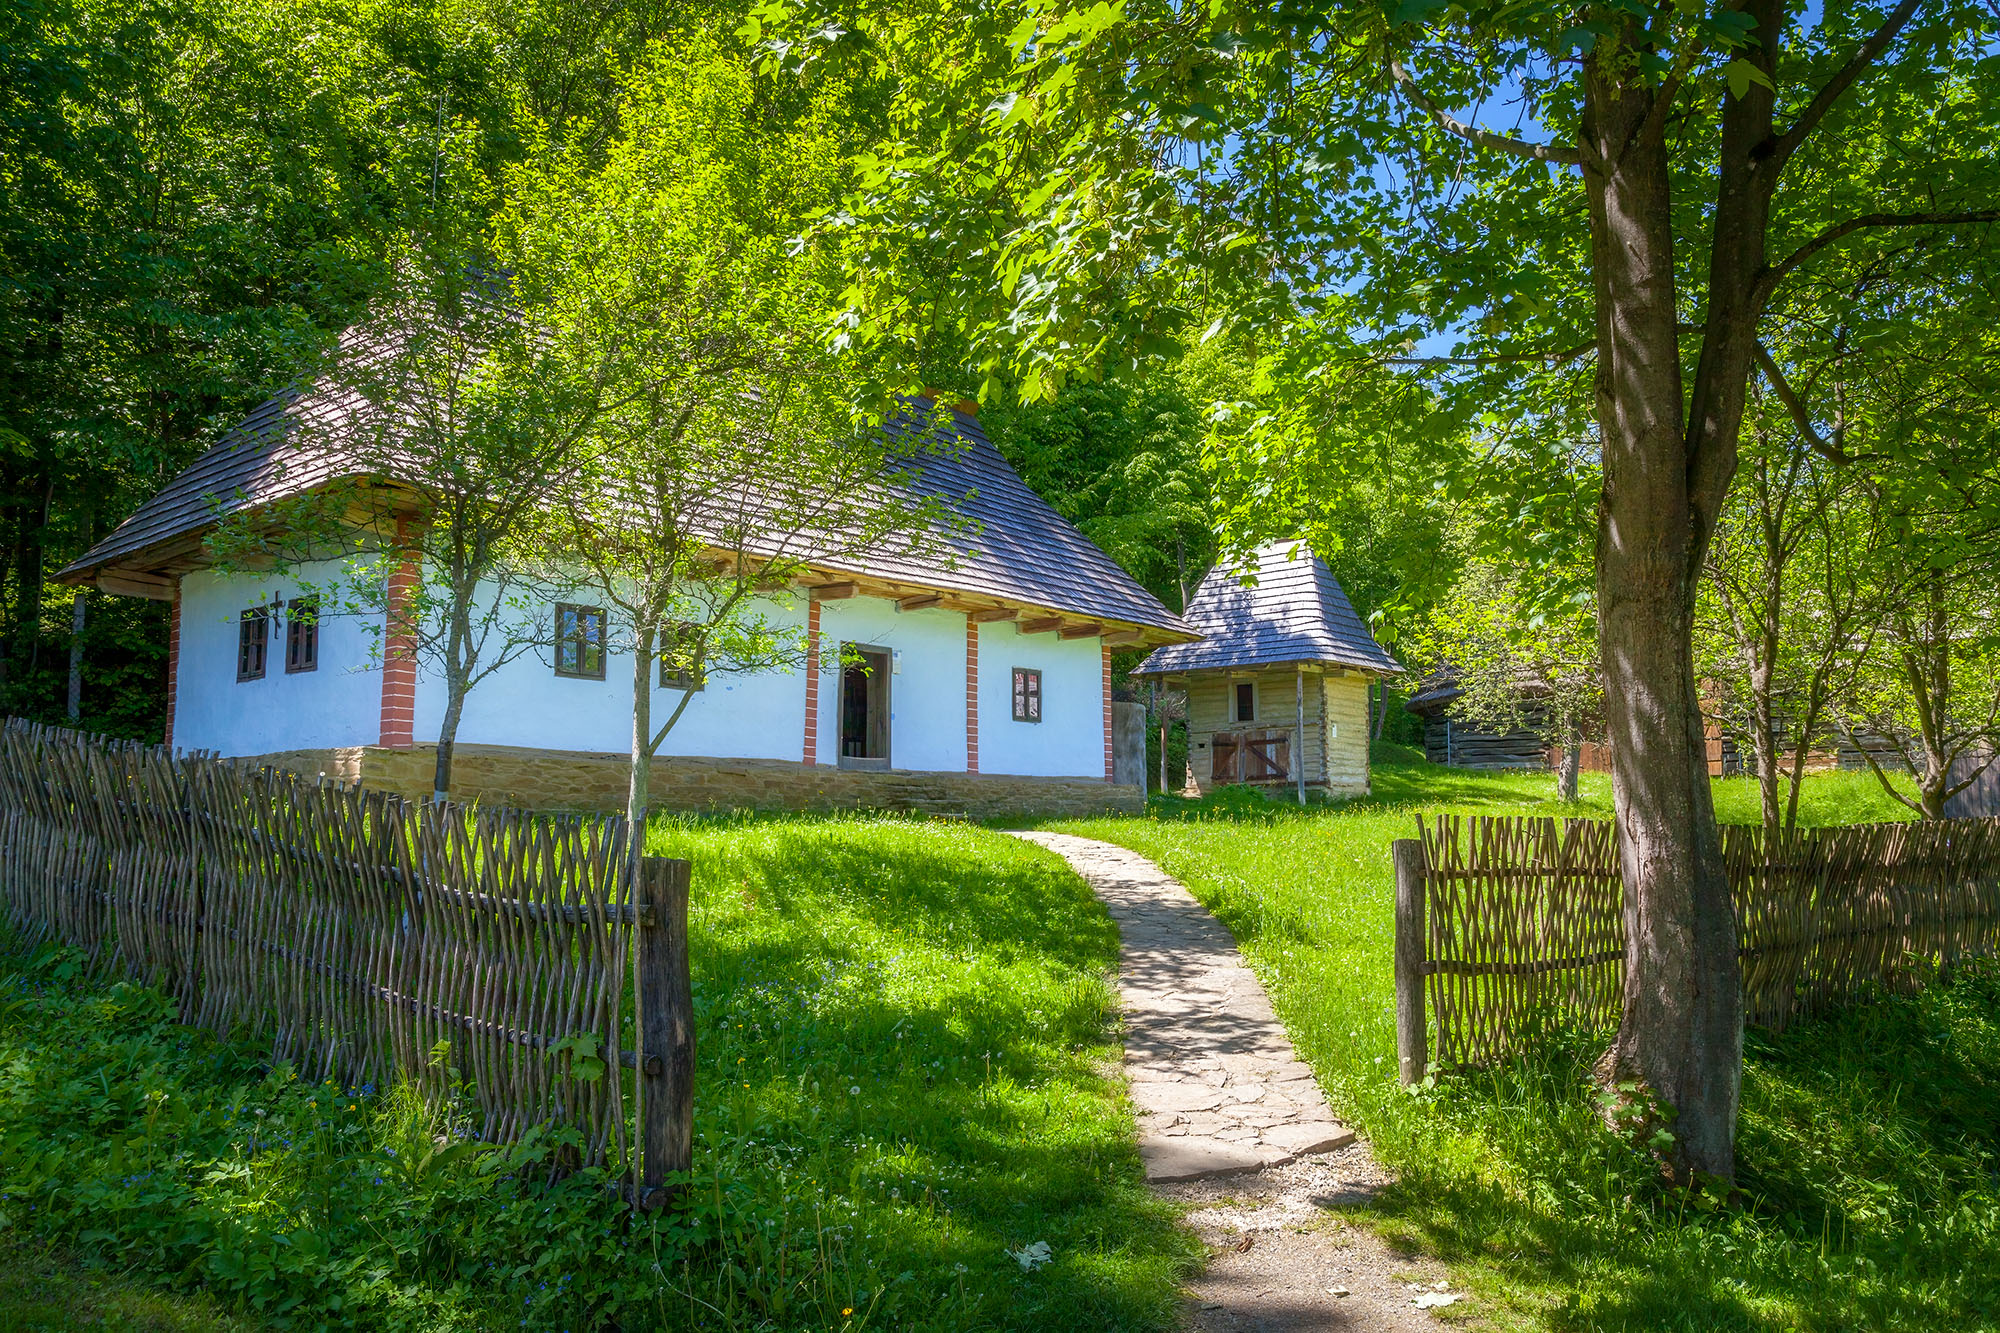 Captured from Bardejov Spa's Saris Museum, this image unveils a rustic peasant home nestled under a verdant tree canopy, visible...